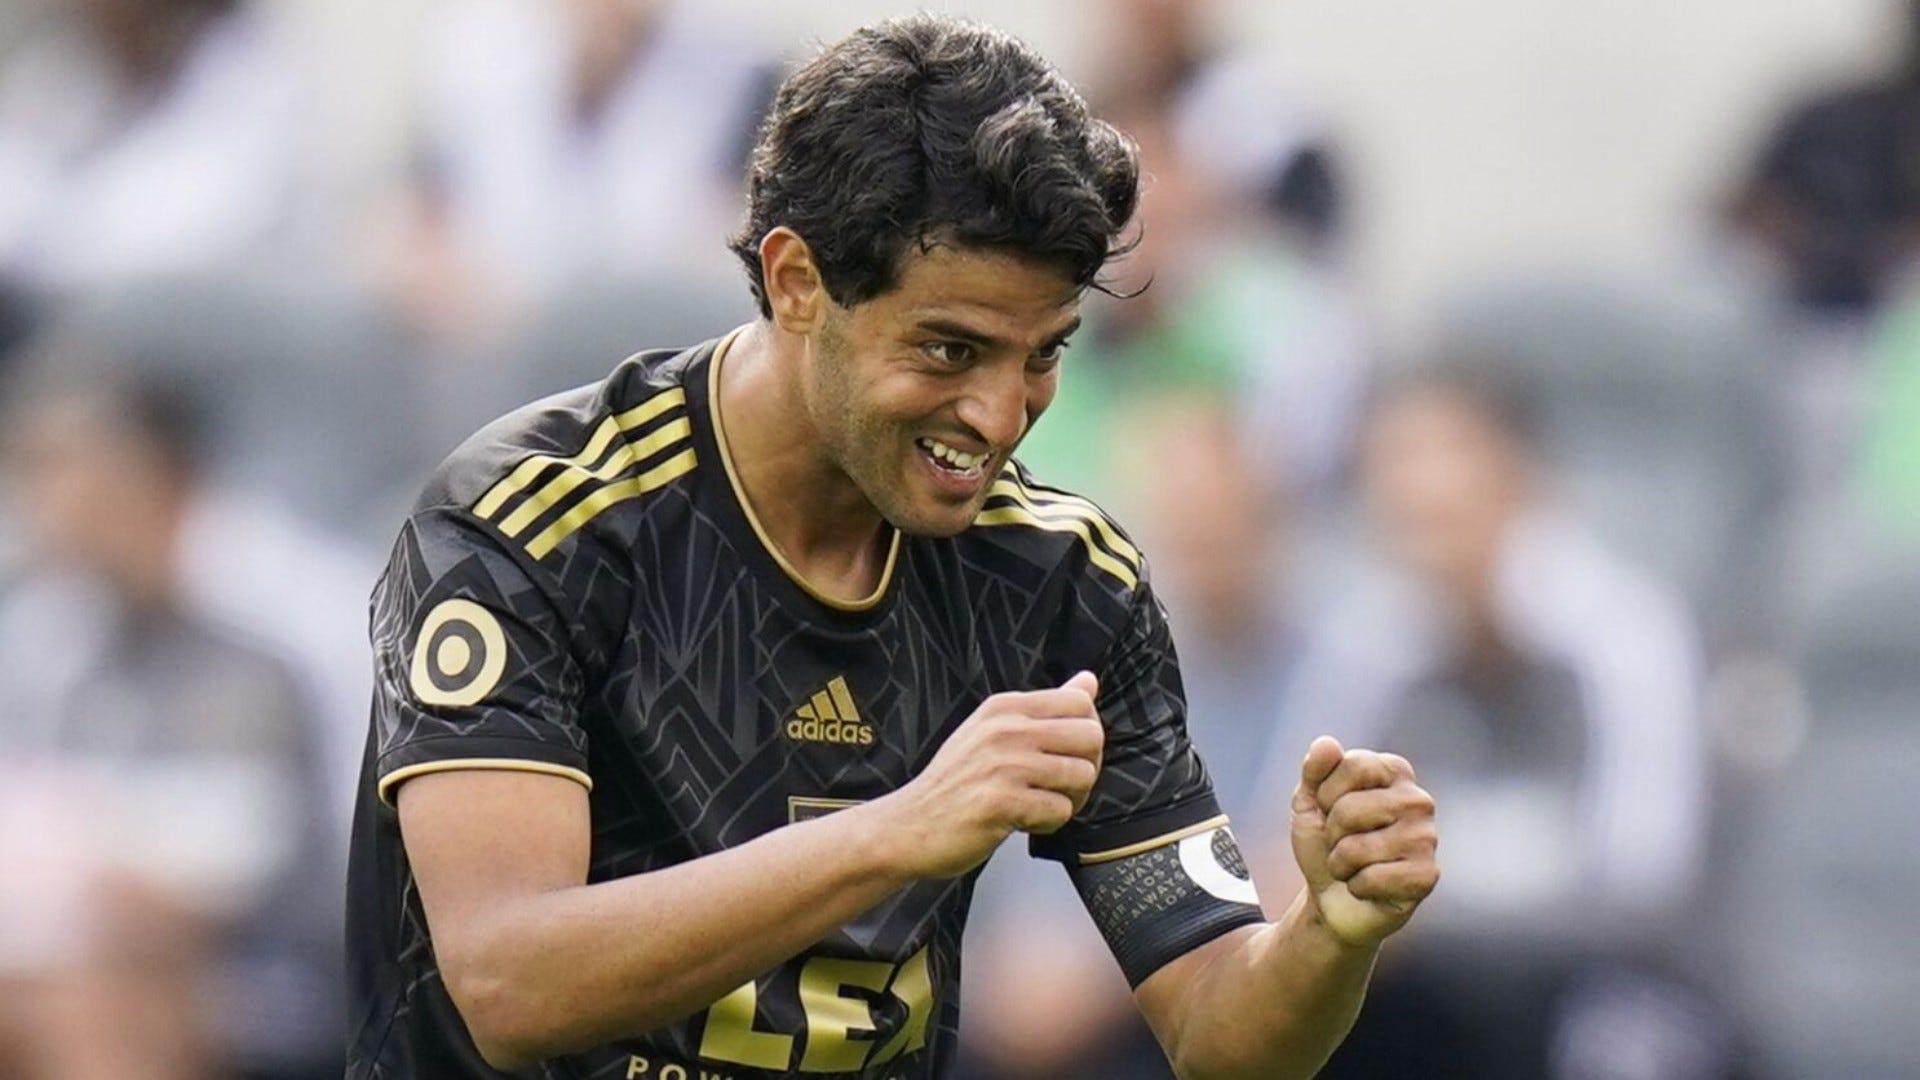 Los Angeles FC vs Austin FC Live stream, TV channel, kick-off time and how to watch Goal US